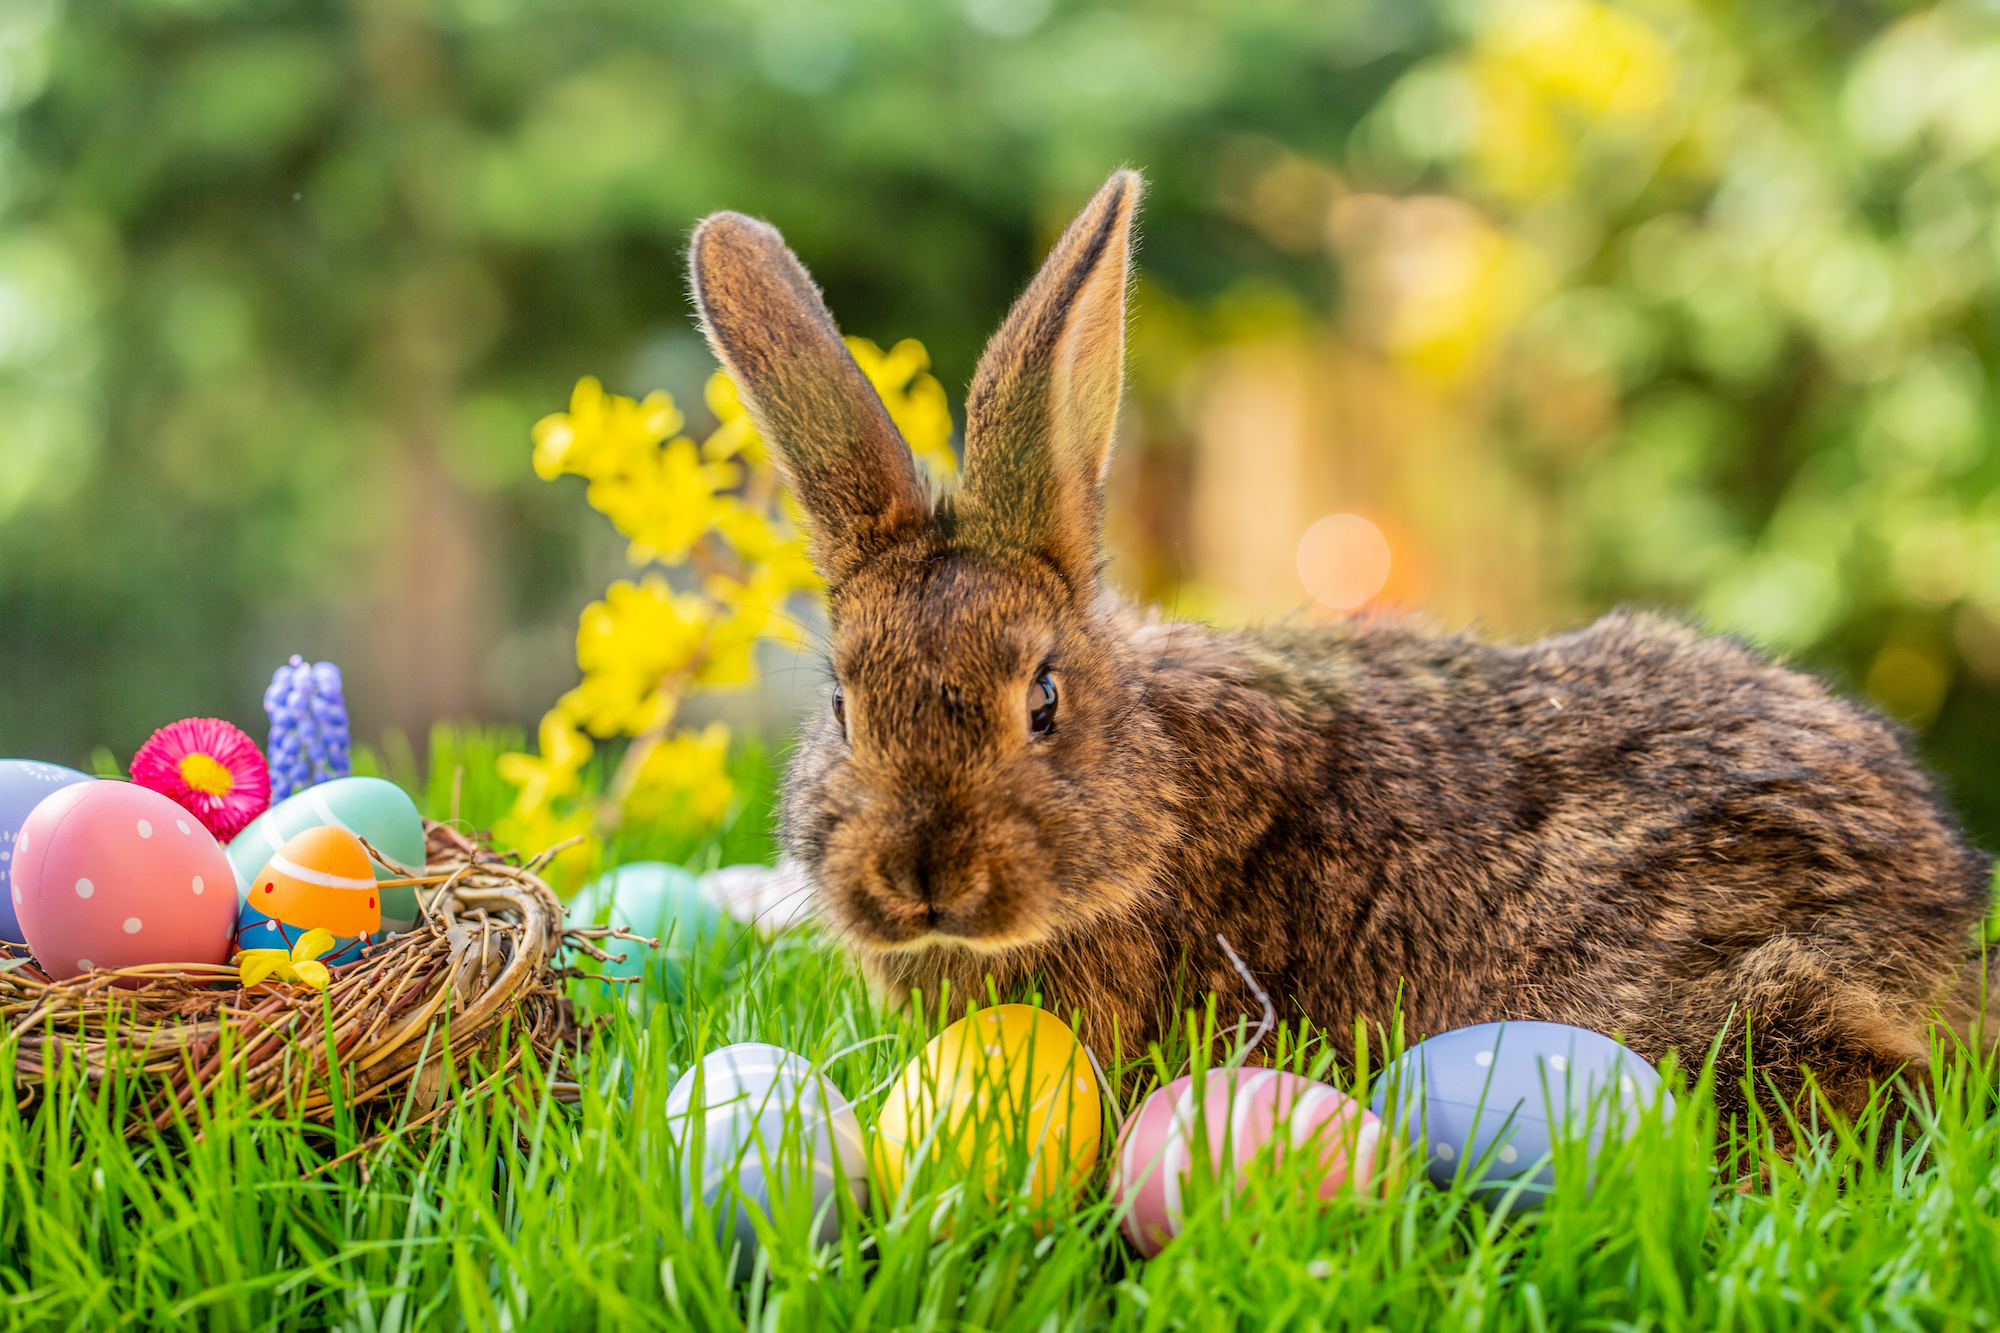 Easter Bunny Origins & History: Where Did the Easter Bunny Come From?